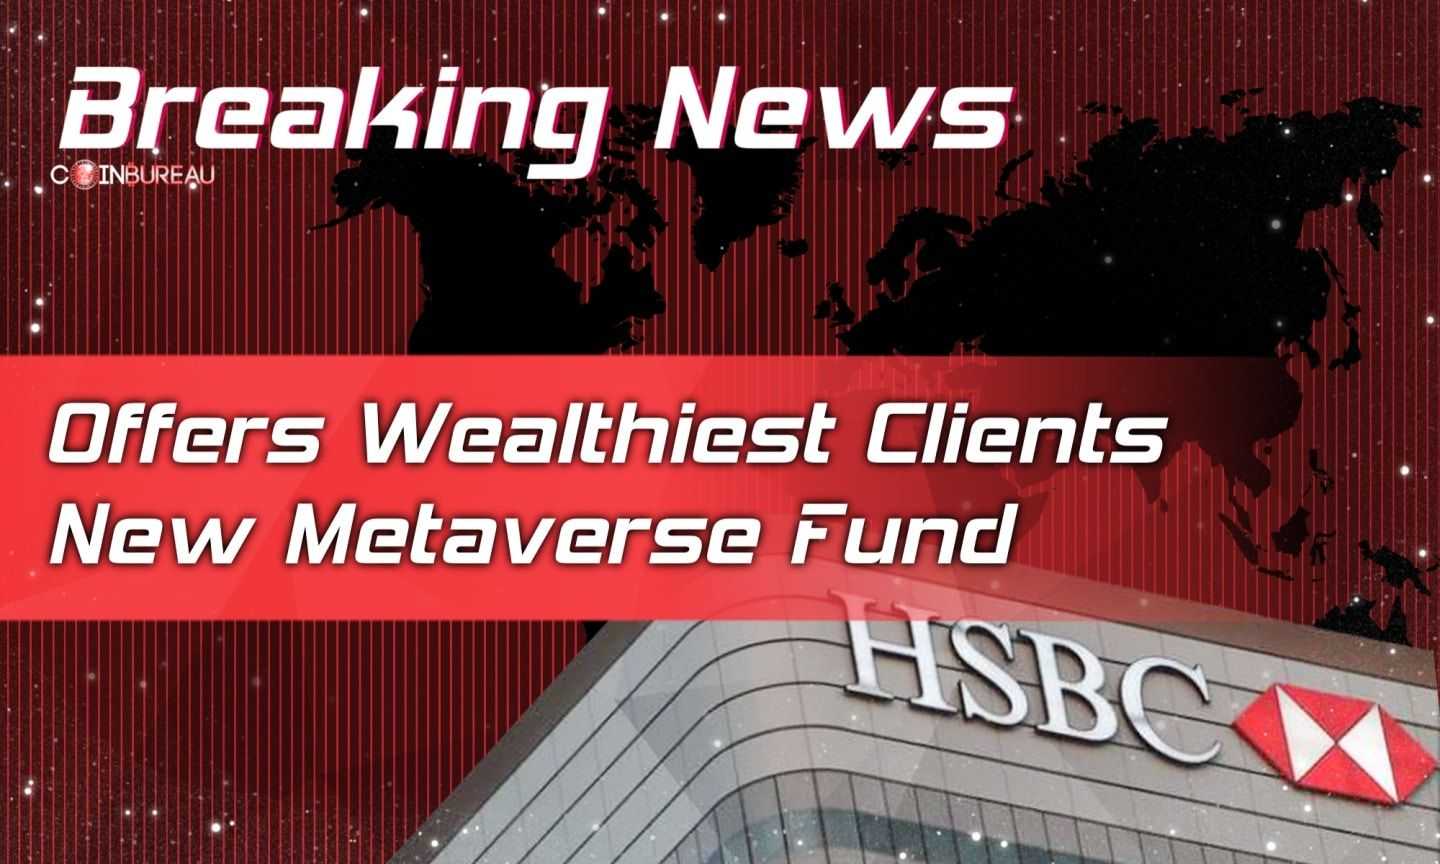 British Banking Giant HSBC Offers Wealthiest Clients New Metaverse Fund